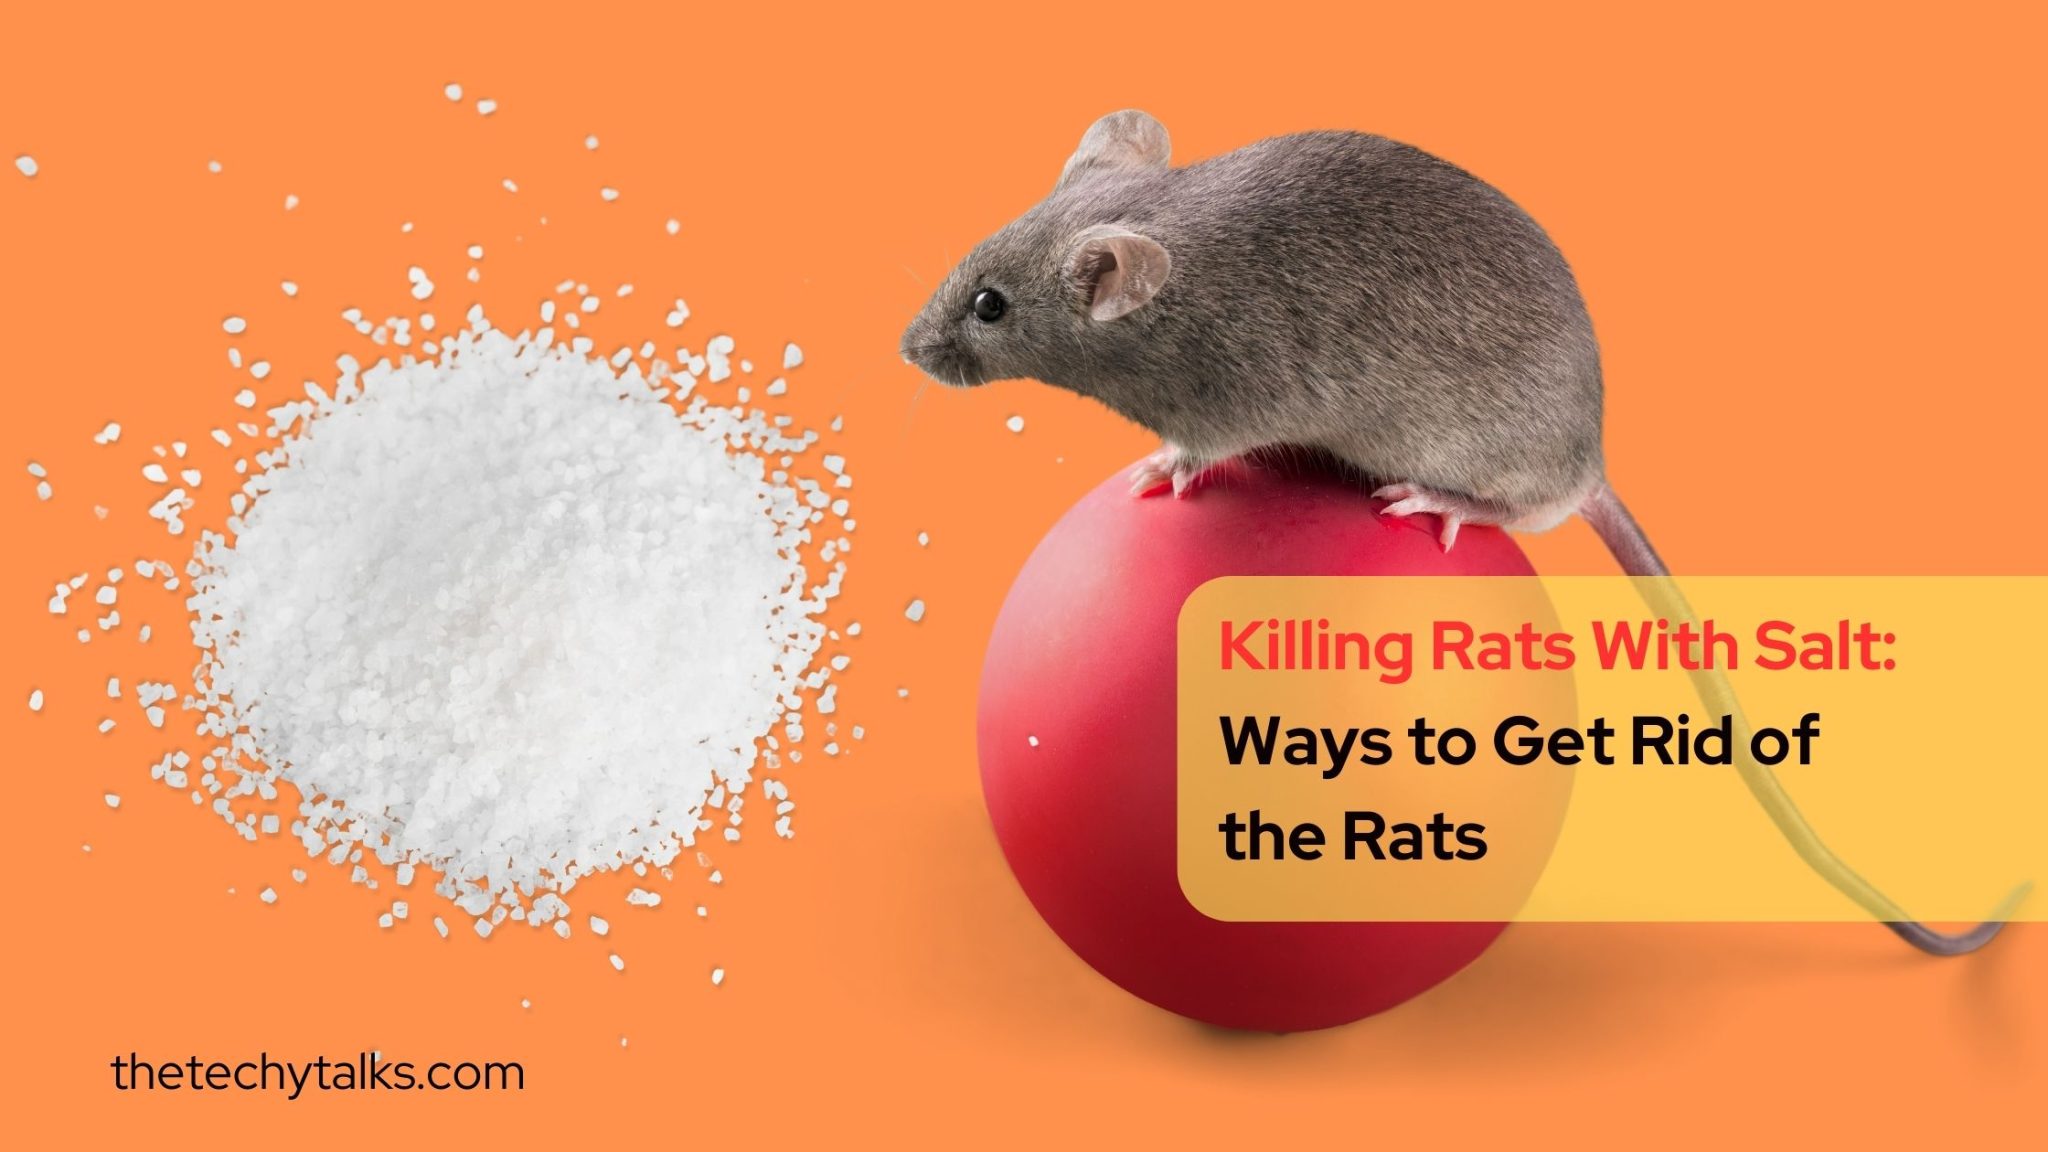 Killing Rats With Salt: Ways to Get Rid of the Rats